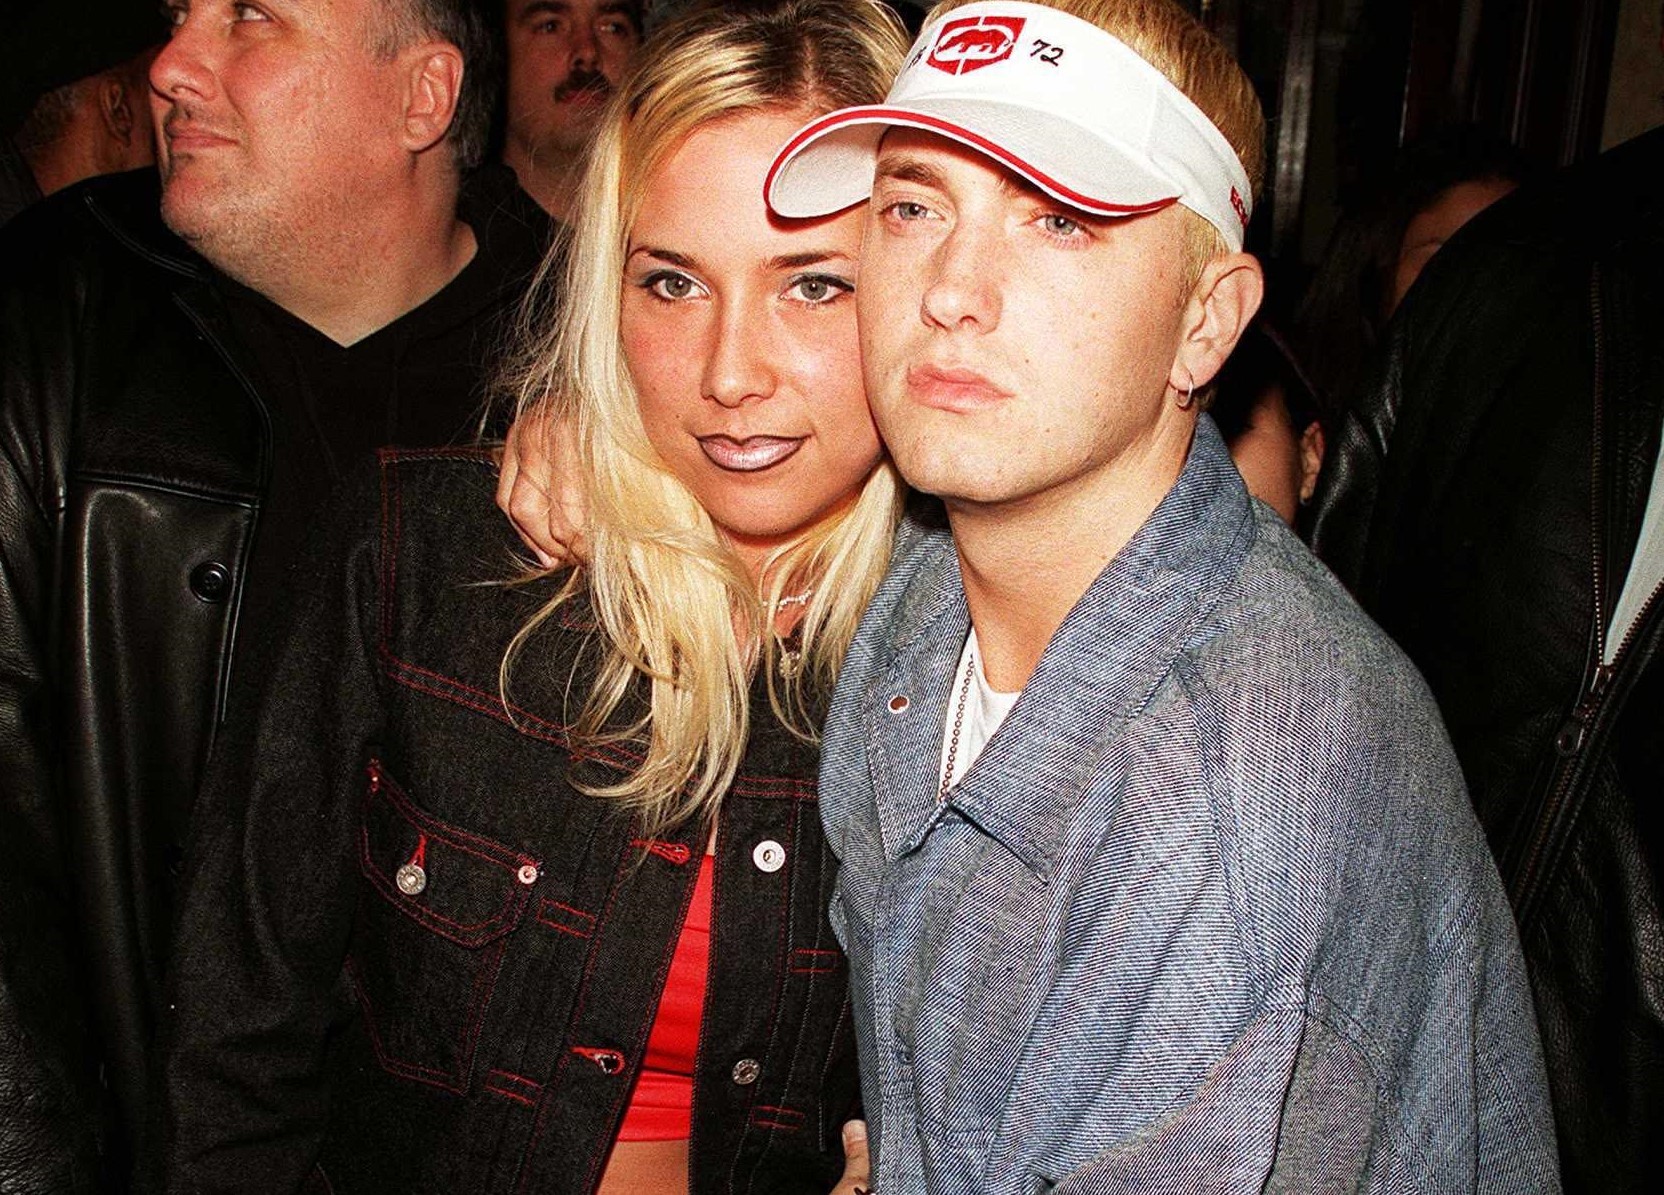 Eminem wife, Hailie Jade, and personal life